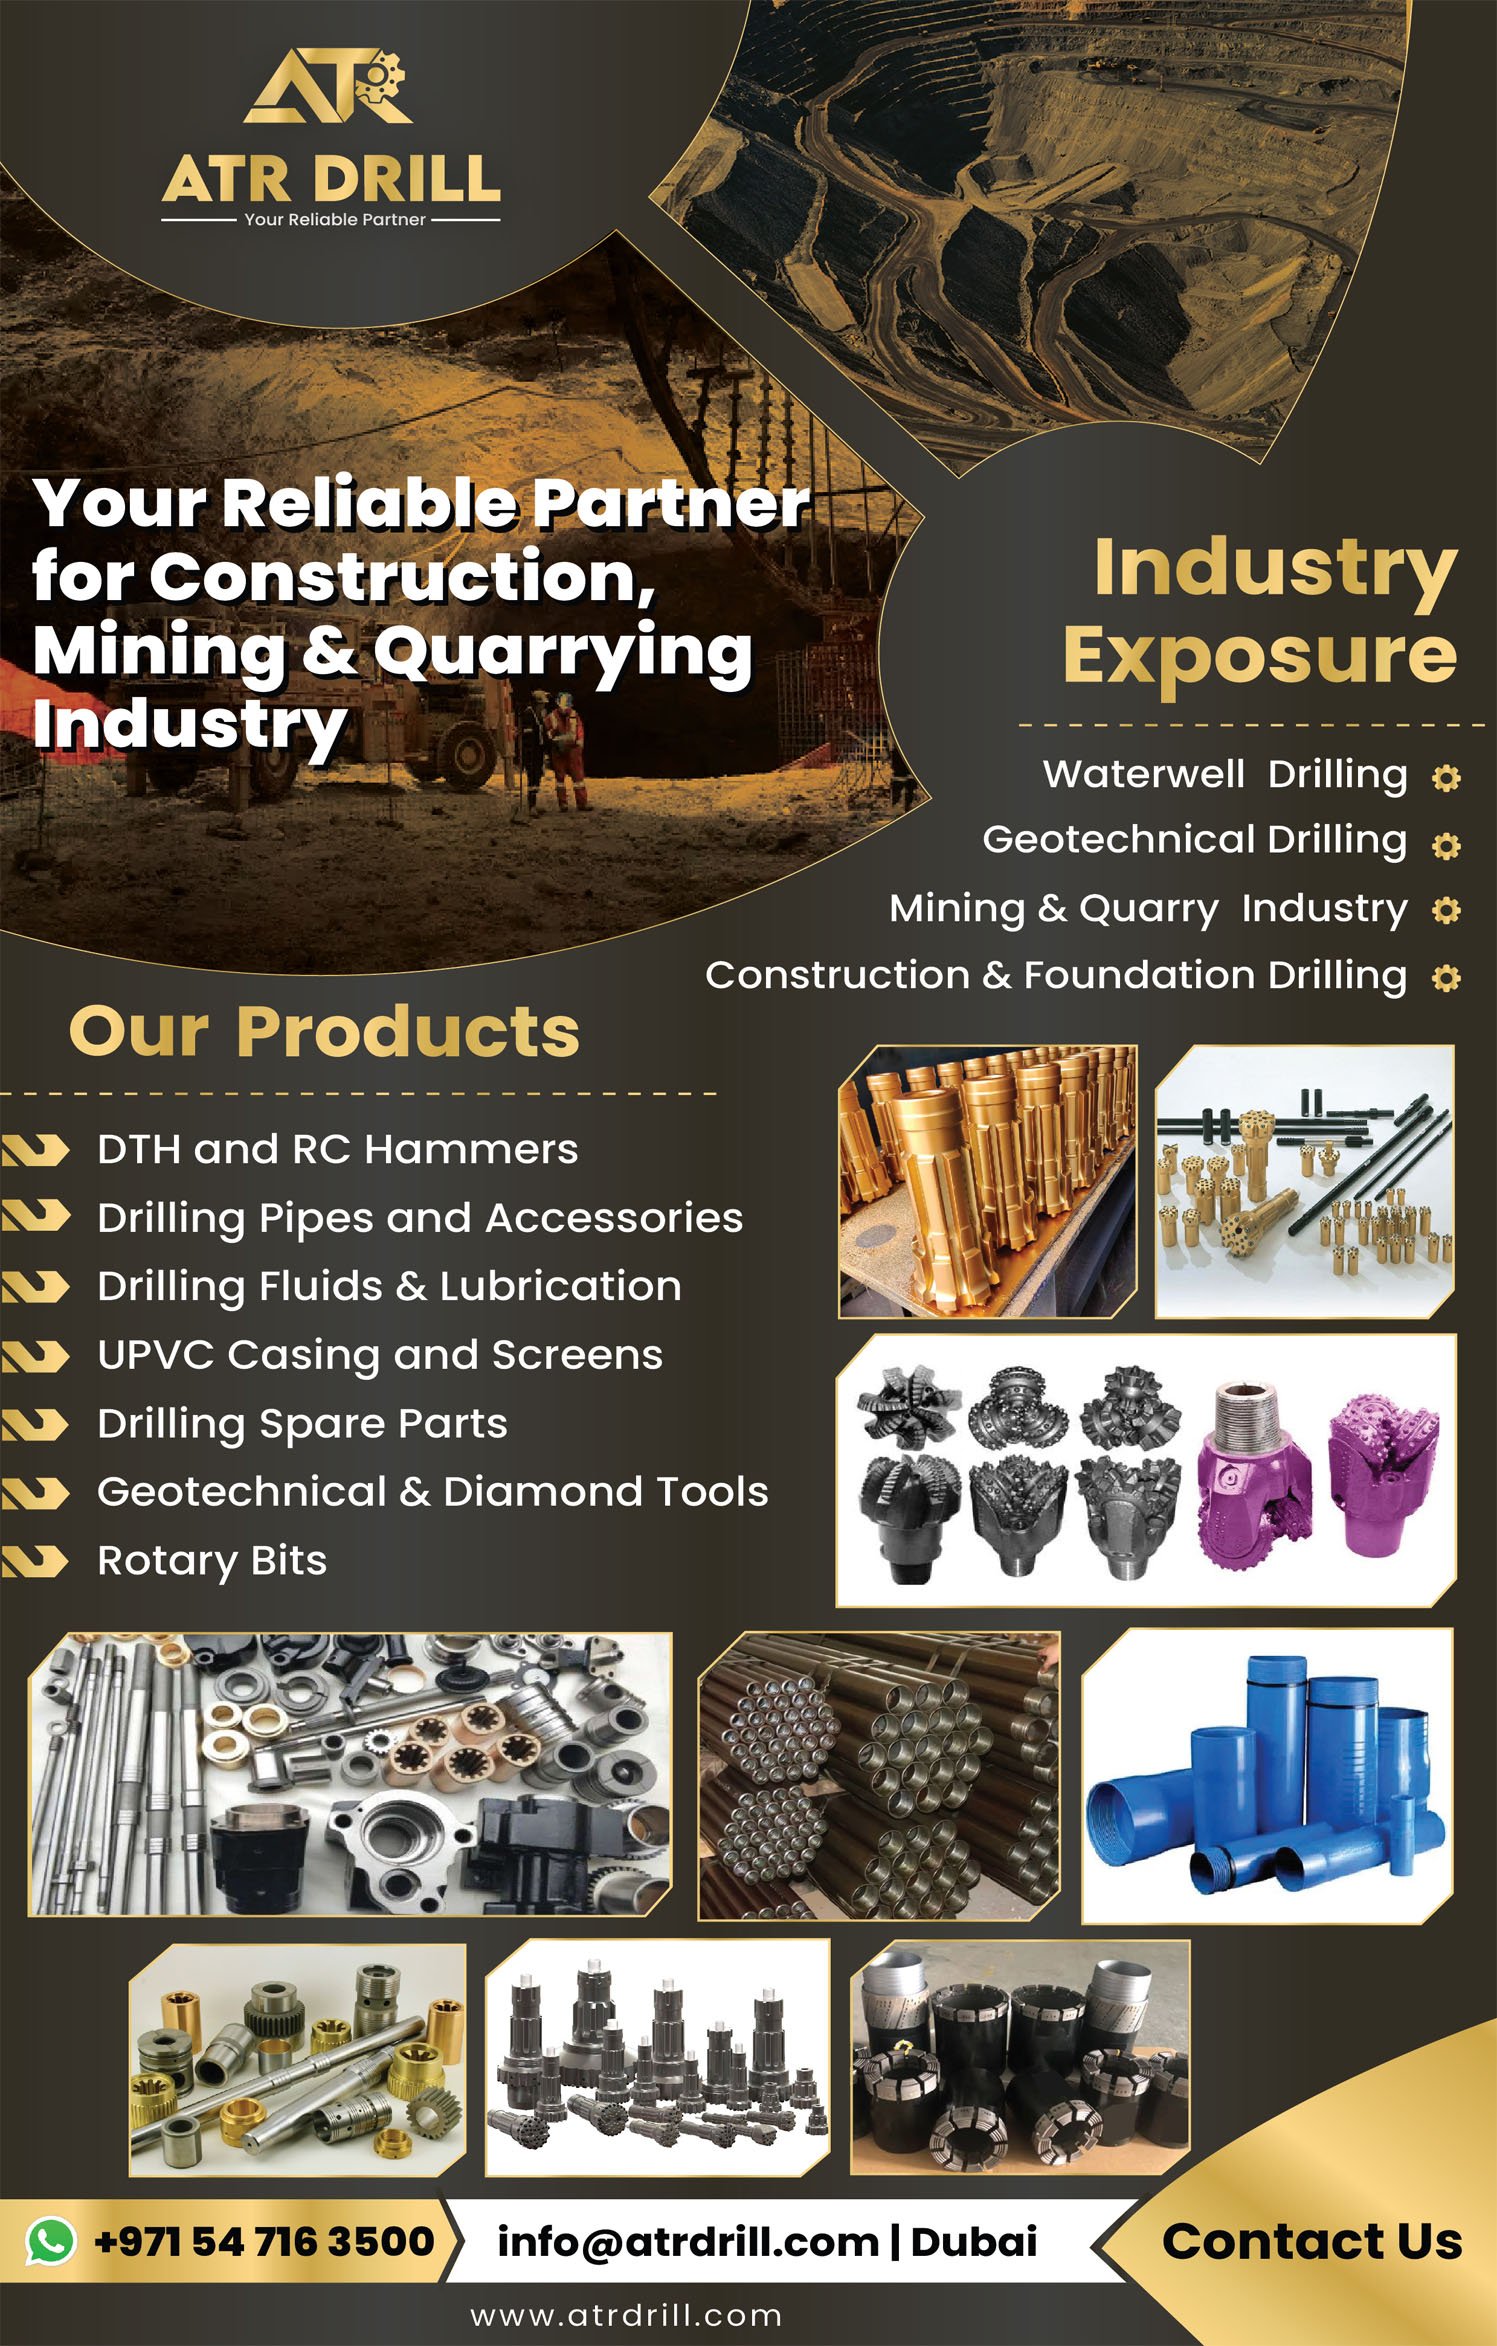 Mining and quarrying tools supplier